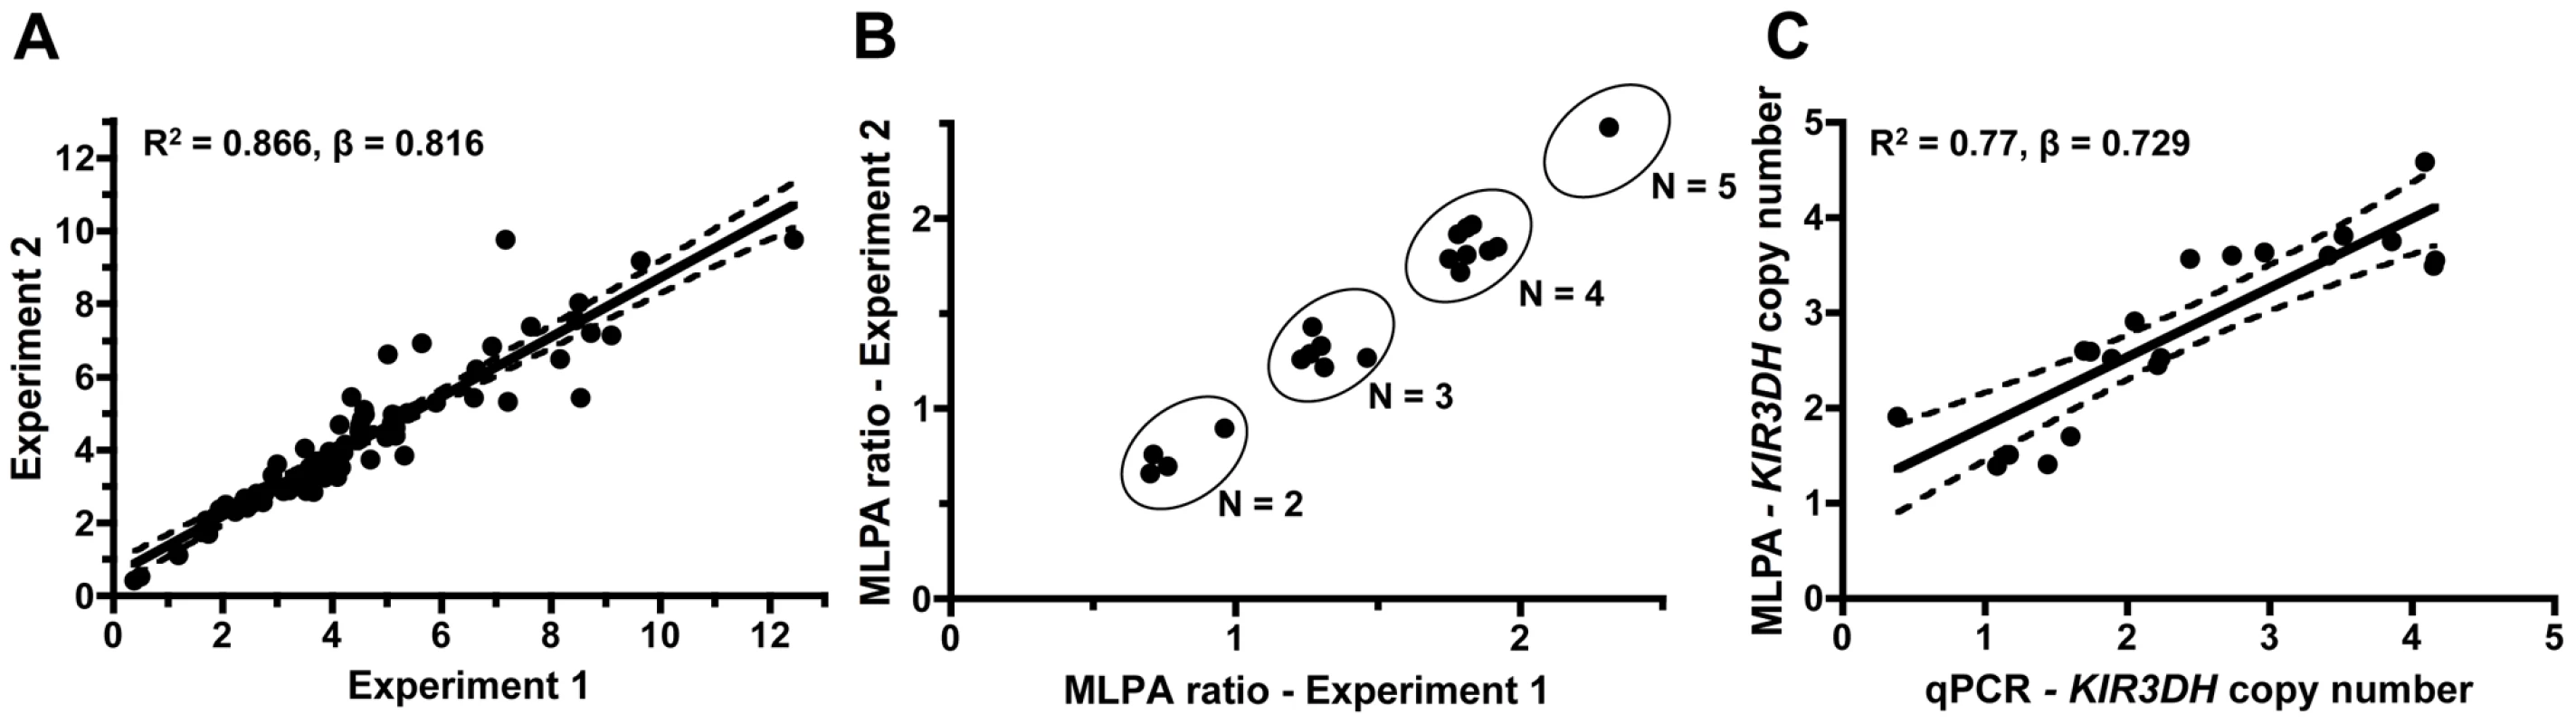 Intra-run reproducibility in <i>KIR3DH</i> copy number determination and validation of quantitative real-time PCR estimates of <i>KIR3DH</i> copy numbers by MLPA (multiplex ligation-dependent probe amplification).